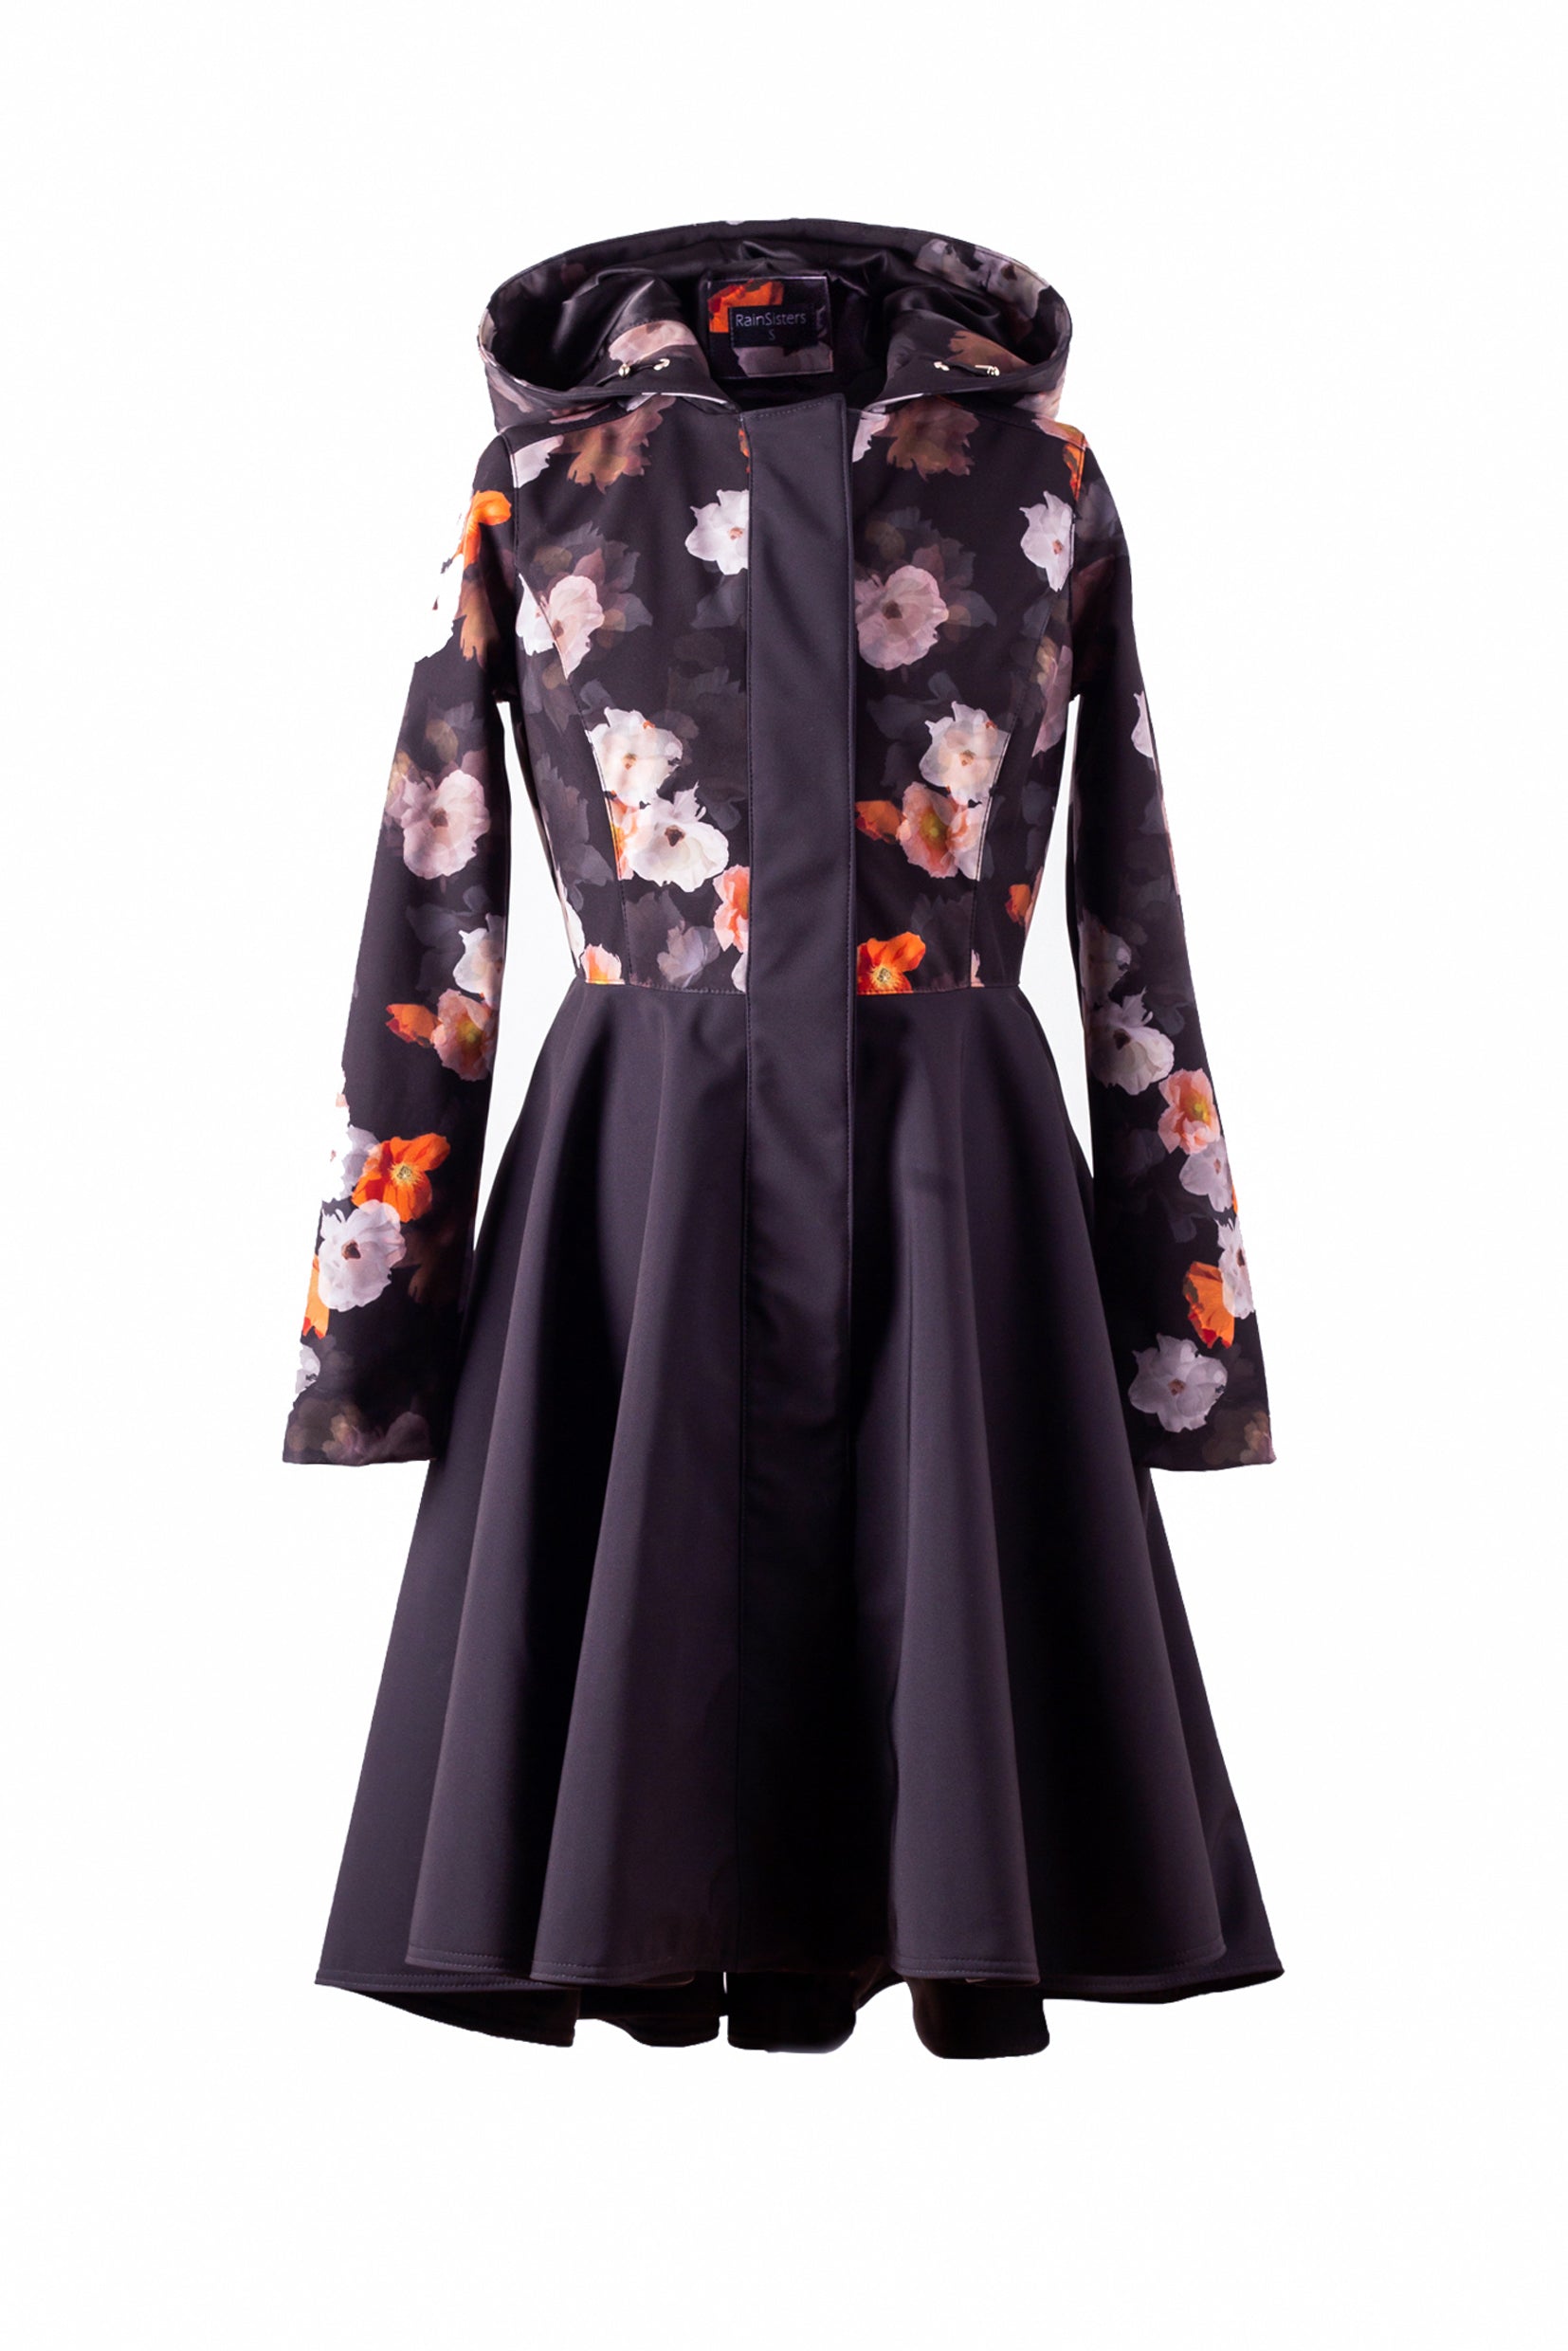 Black Flared Coat with high-low hemline and floral print on top part